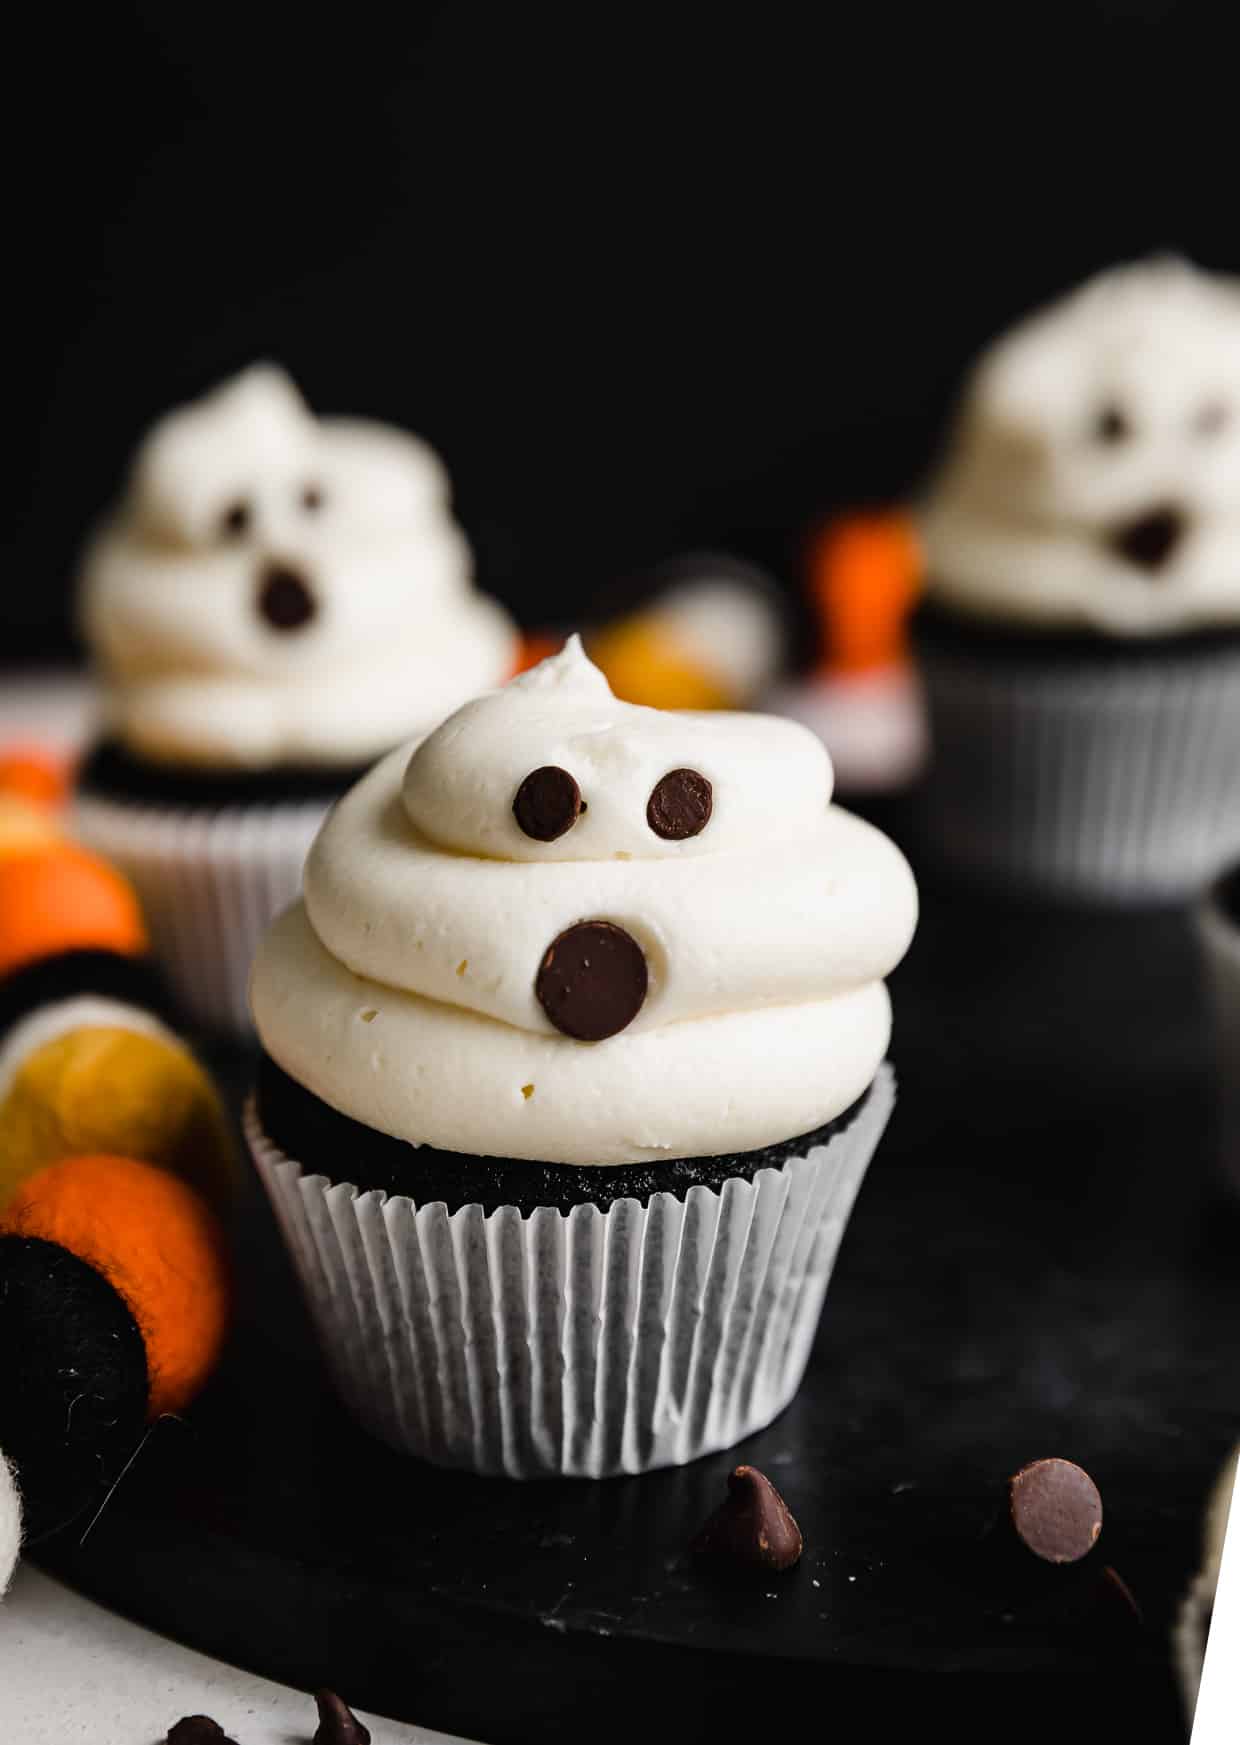 White frosting covered cupcakes with chocolate chips stuck into the frosting to make Ghost Cupcakes.